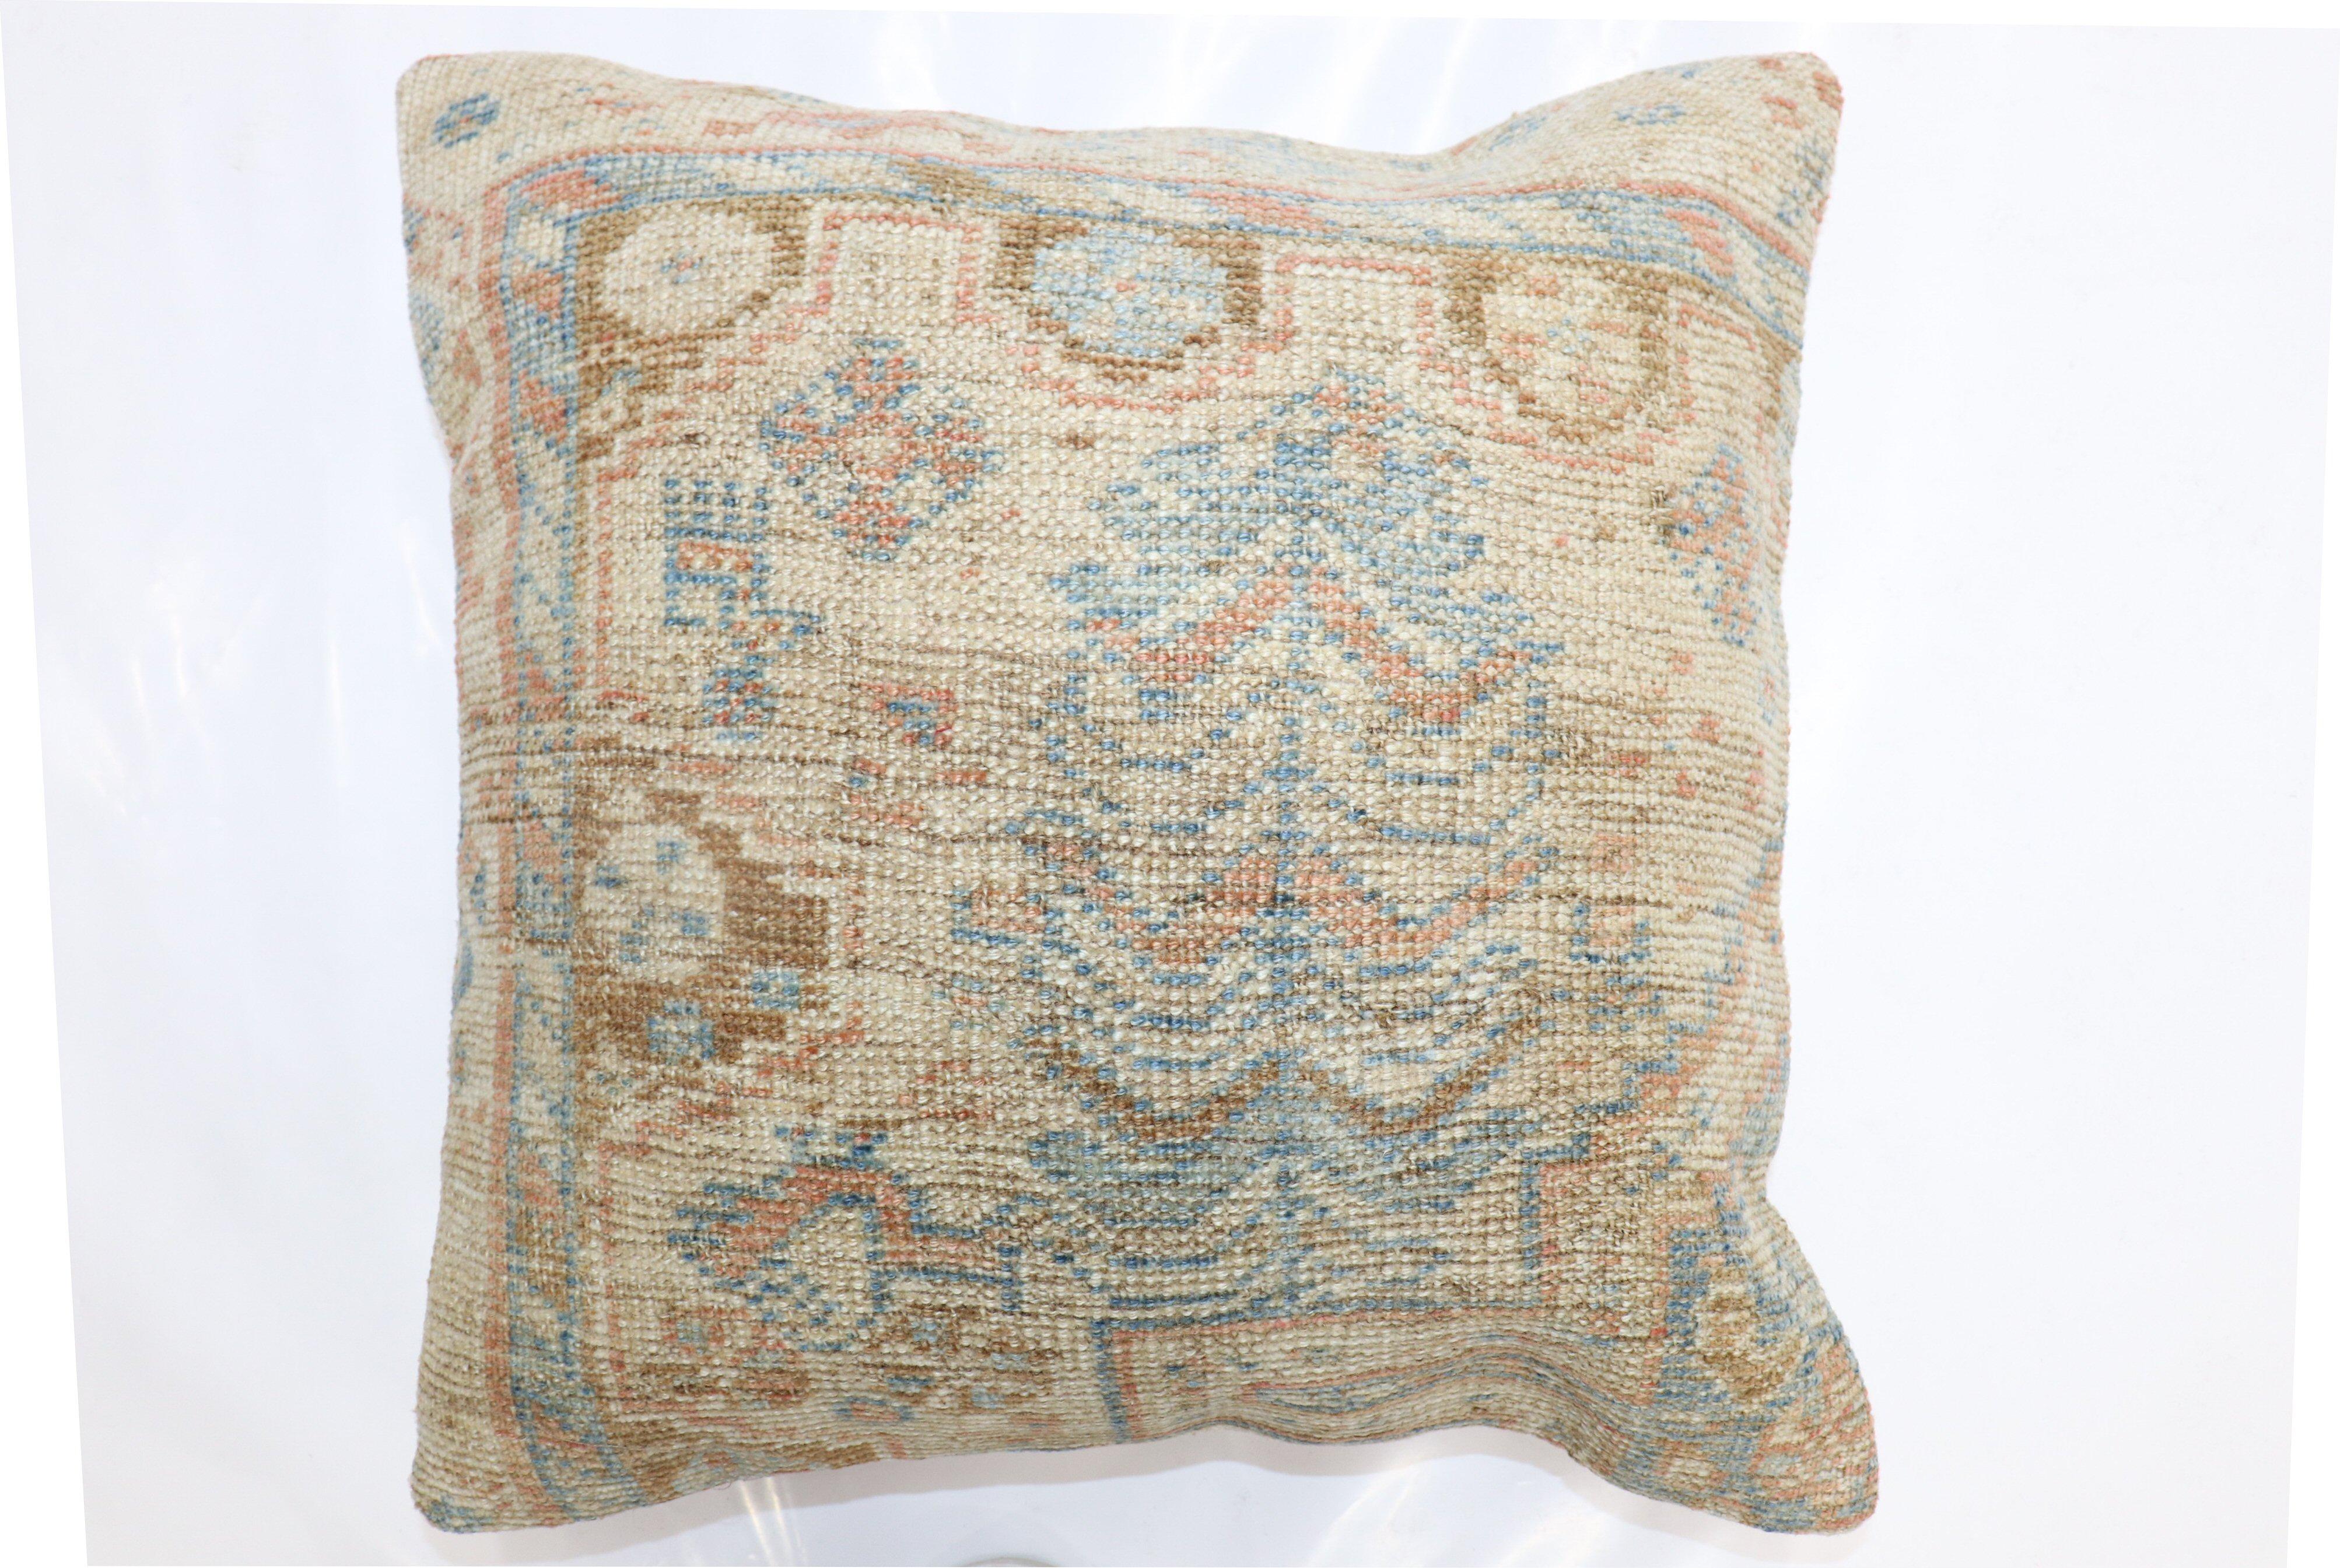 Pillow made from a late 19th-century antique Persian Bakshaish rug with cotton back. Zipper closure.

Measures: 20'' x 20''.